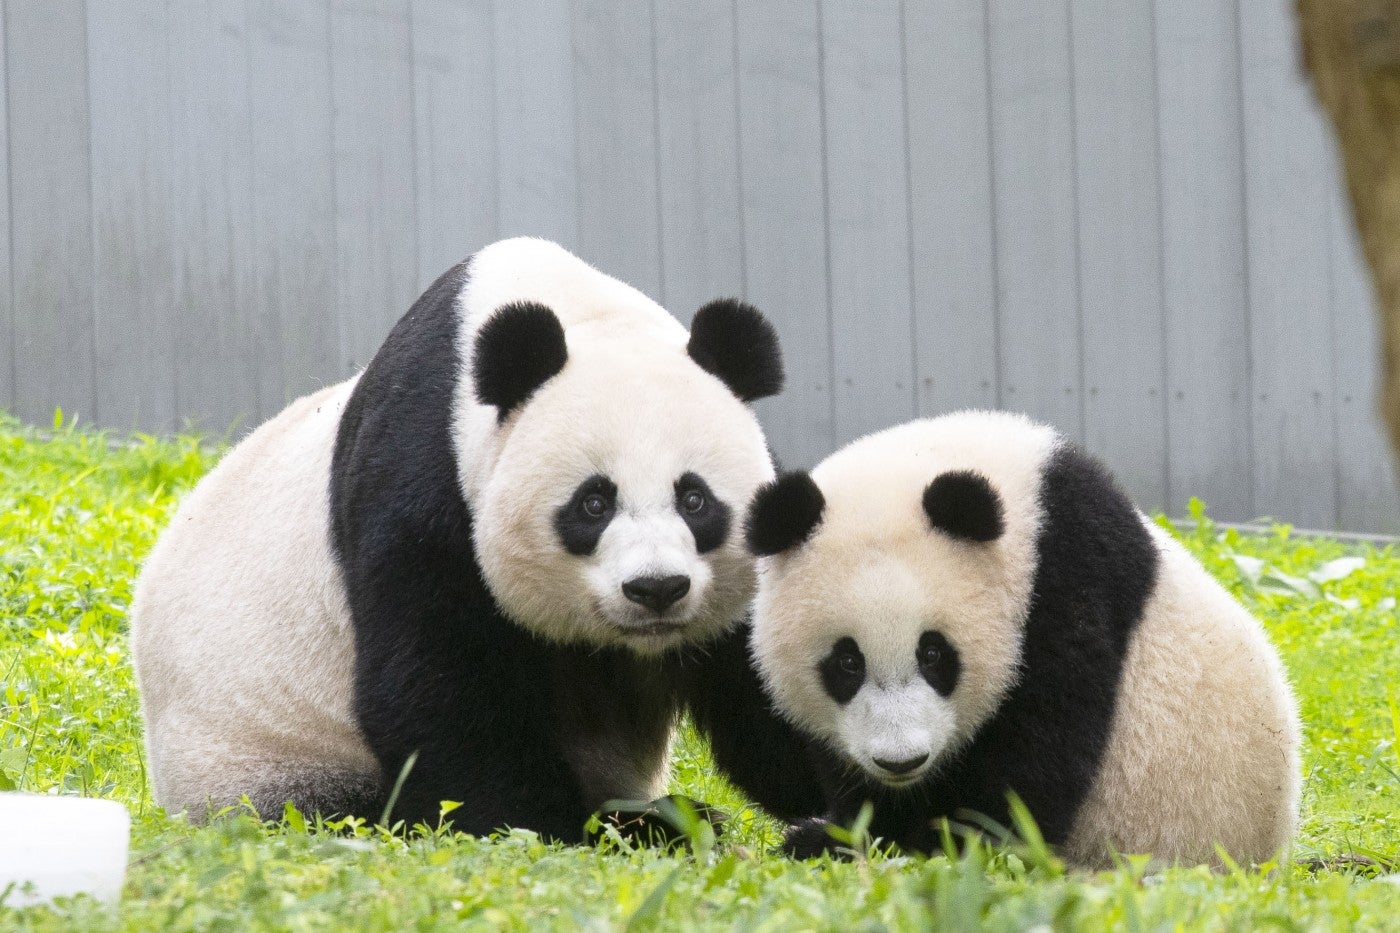 Giant panda mother Mei Xiang (left) and her son Xiao Qi Ji (right) sit next to each other in the grass. 